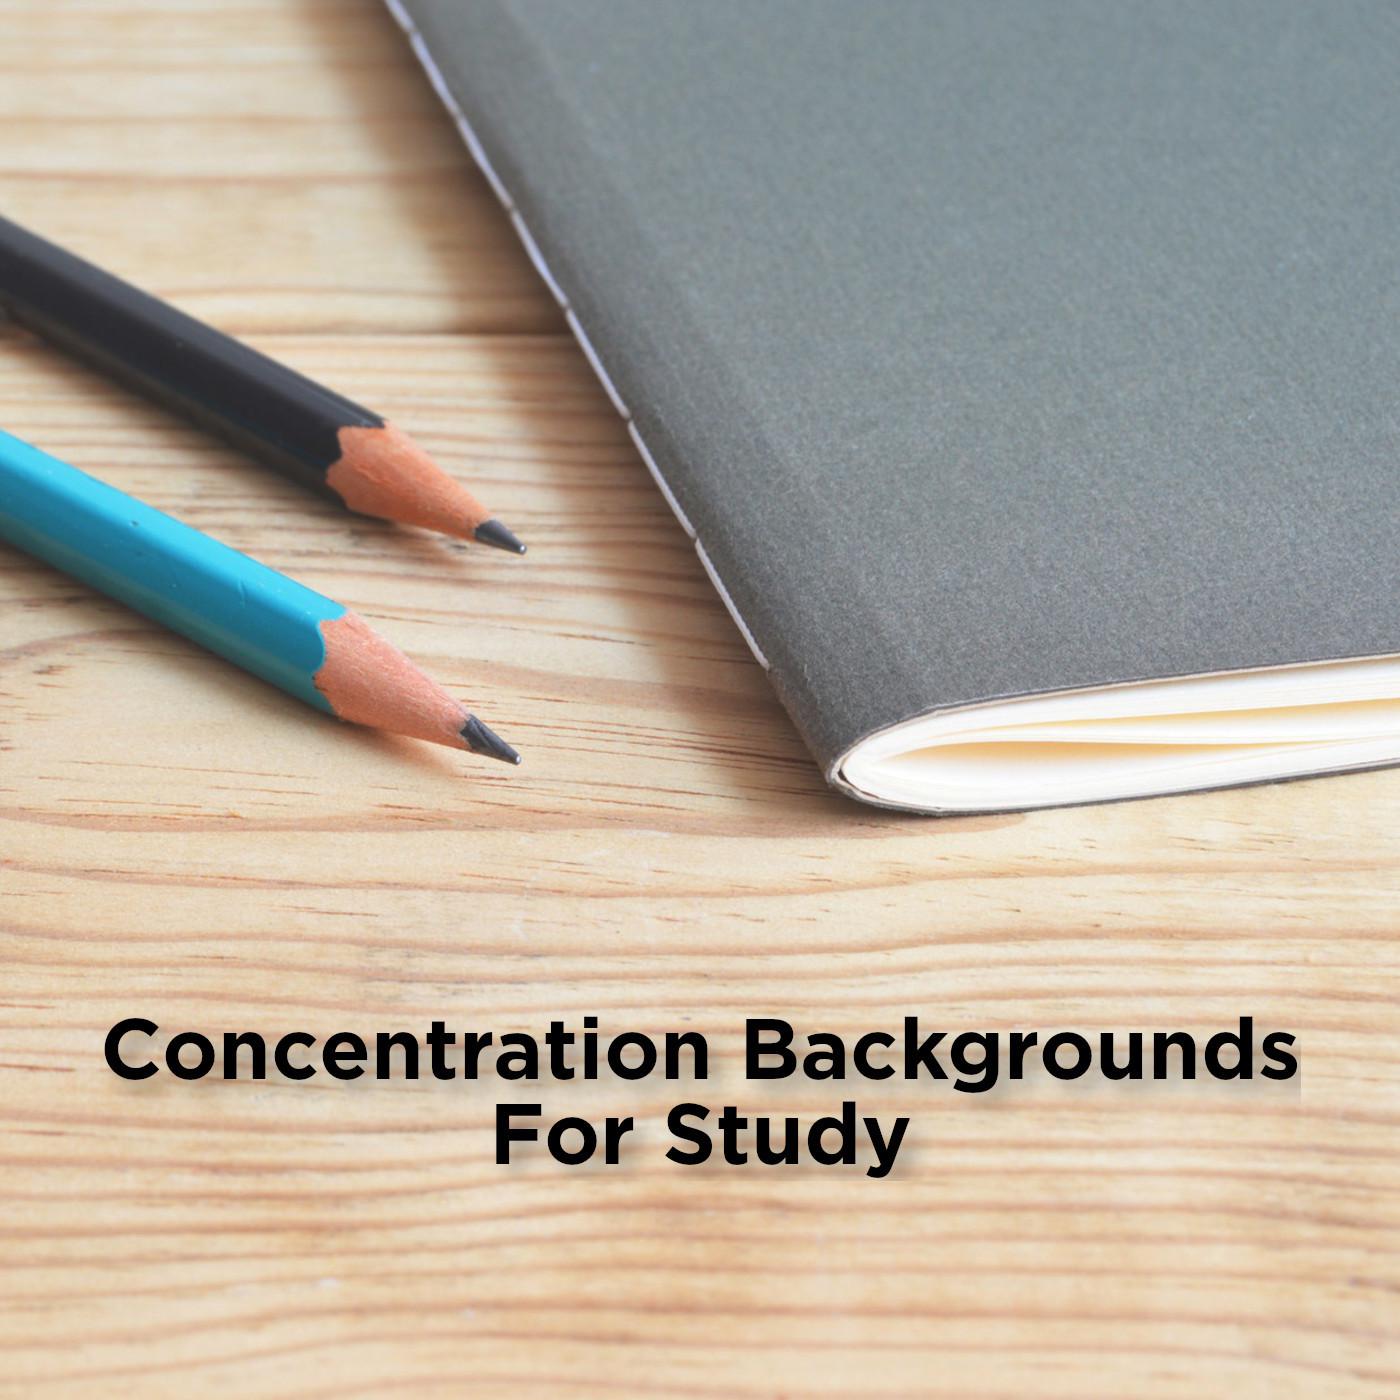 Concentration Background For Study